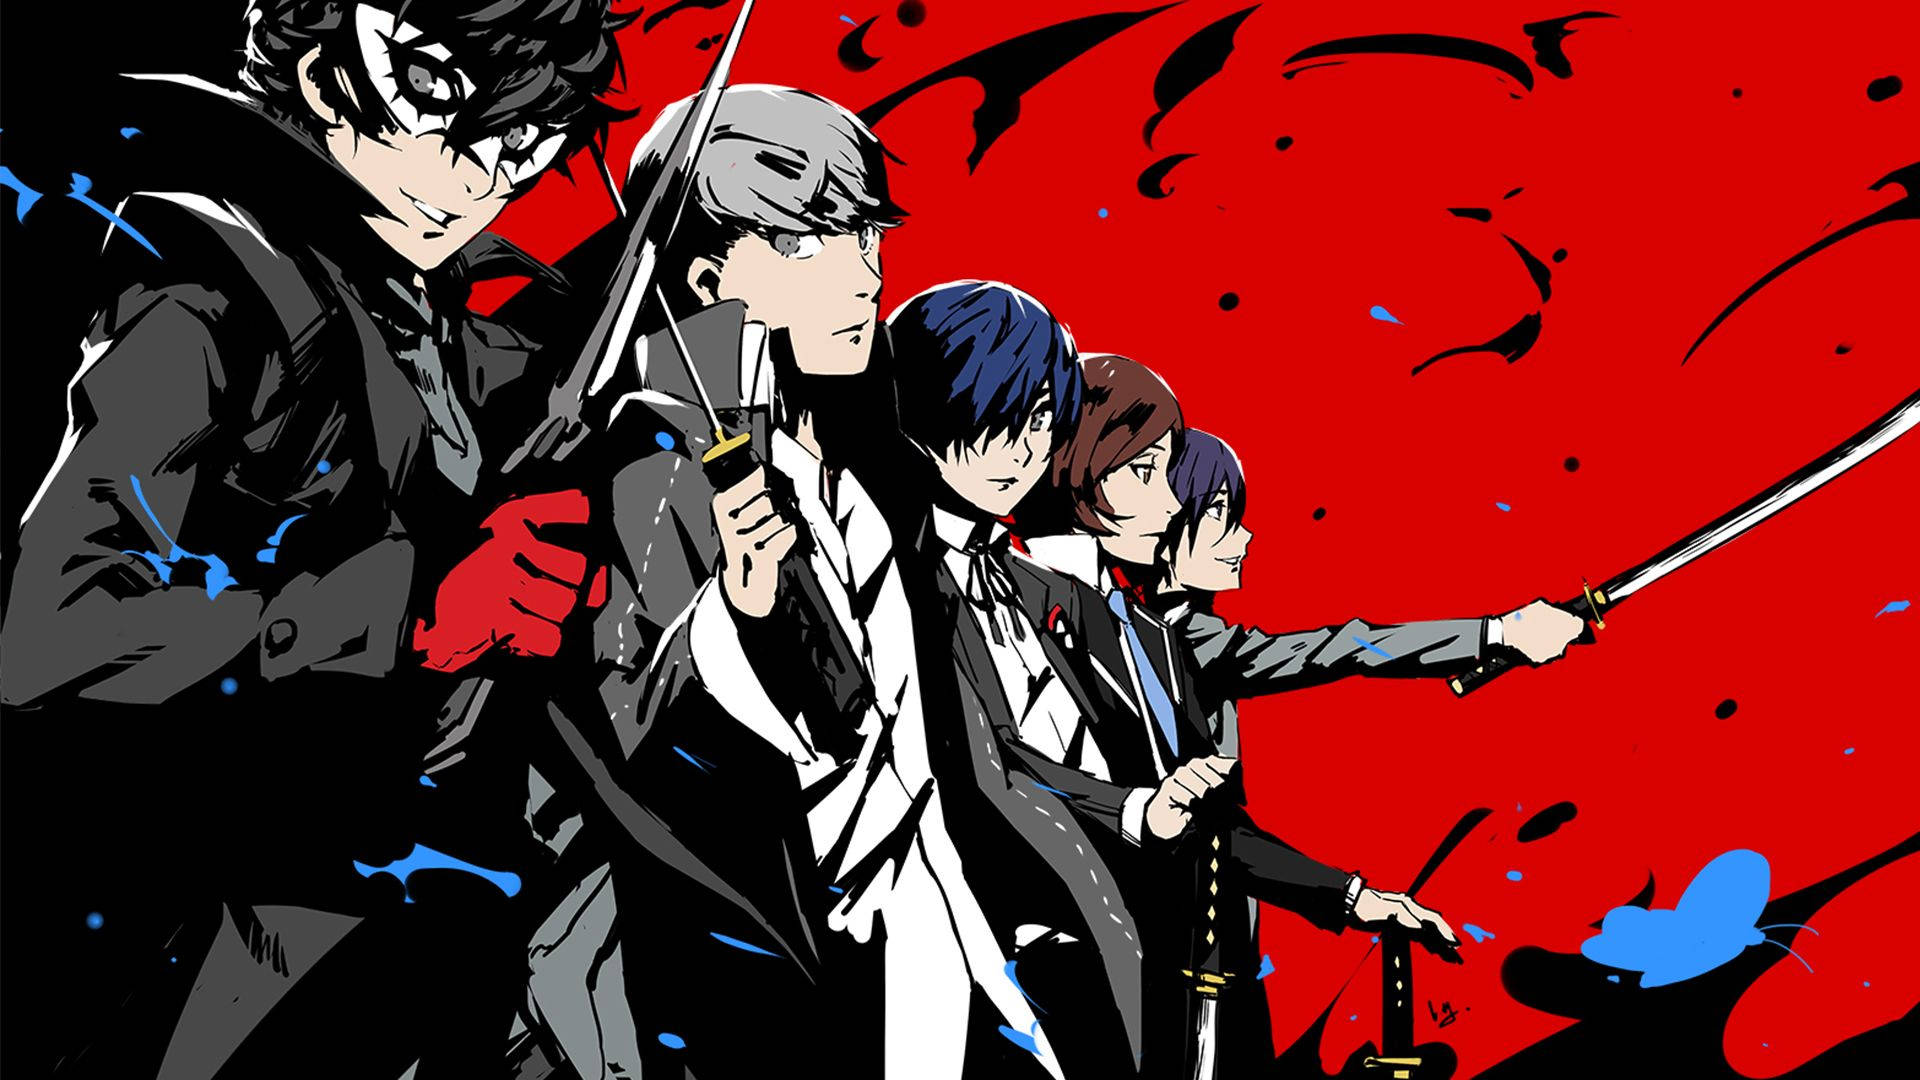 Celebrate the Protagonists of the acclaimed Persona game series Wallpaper